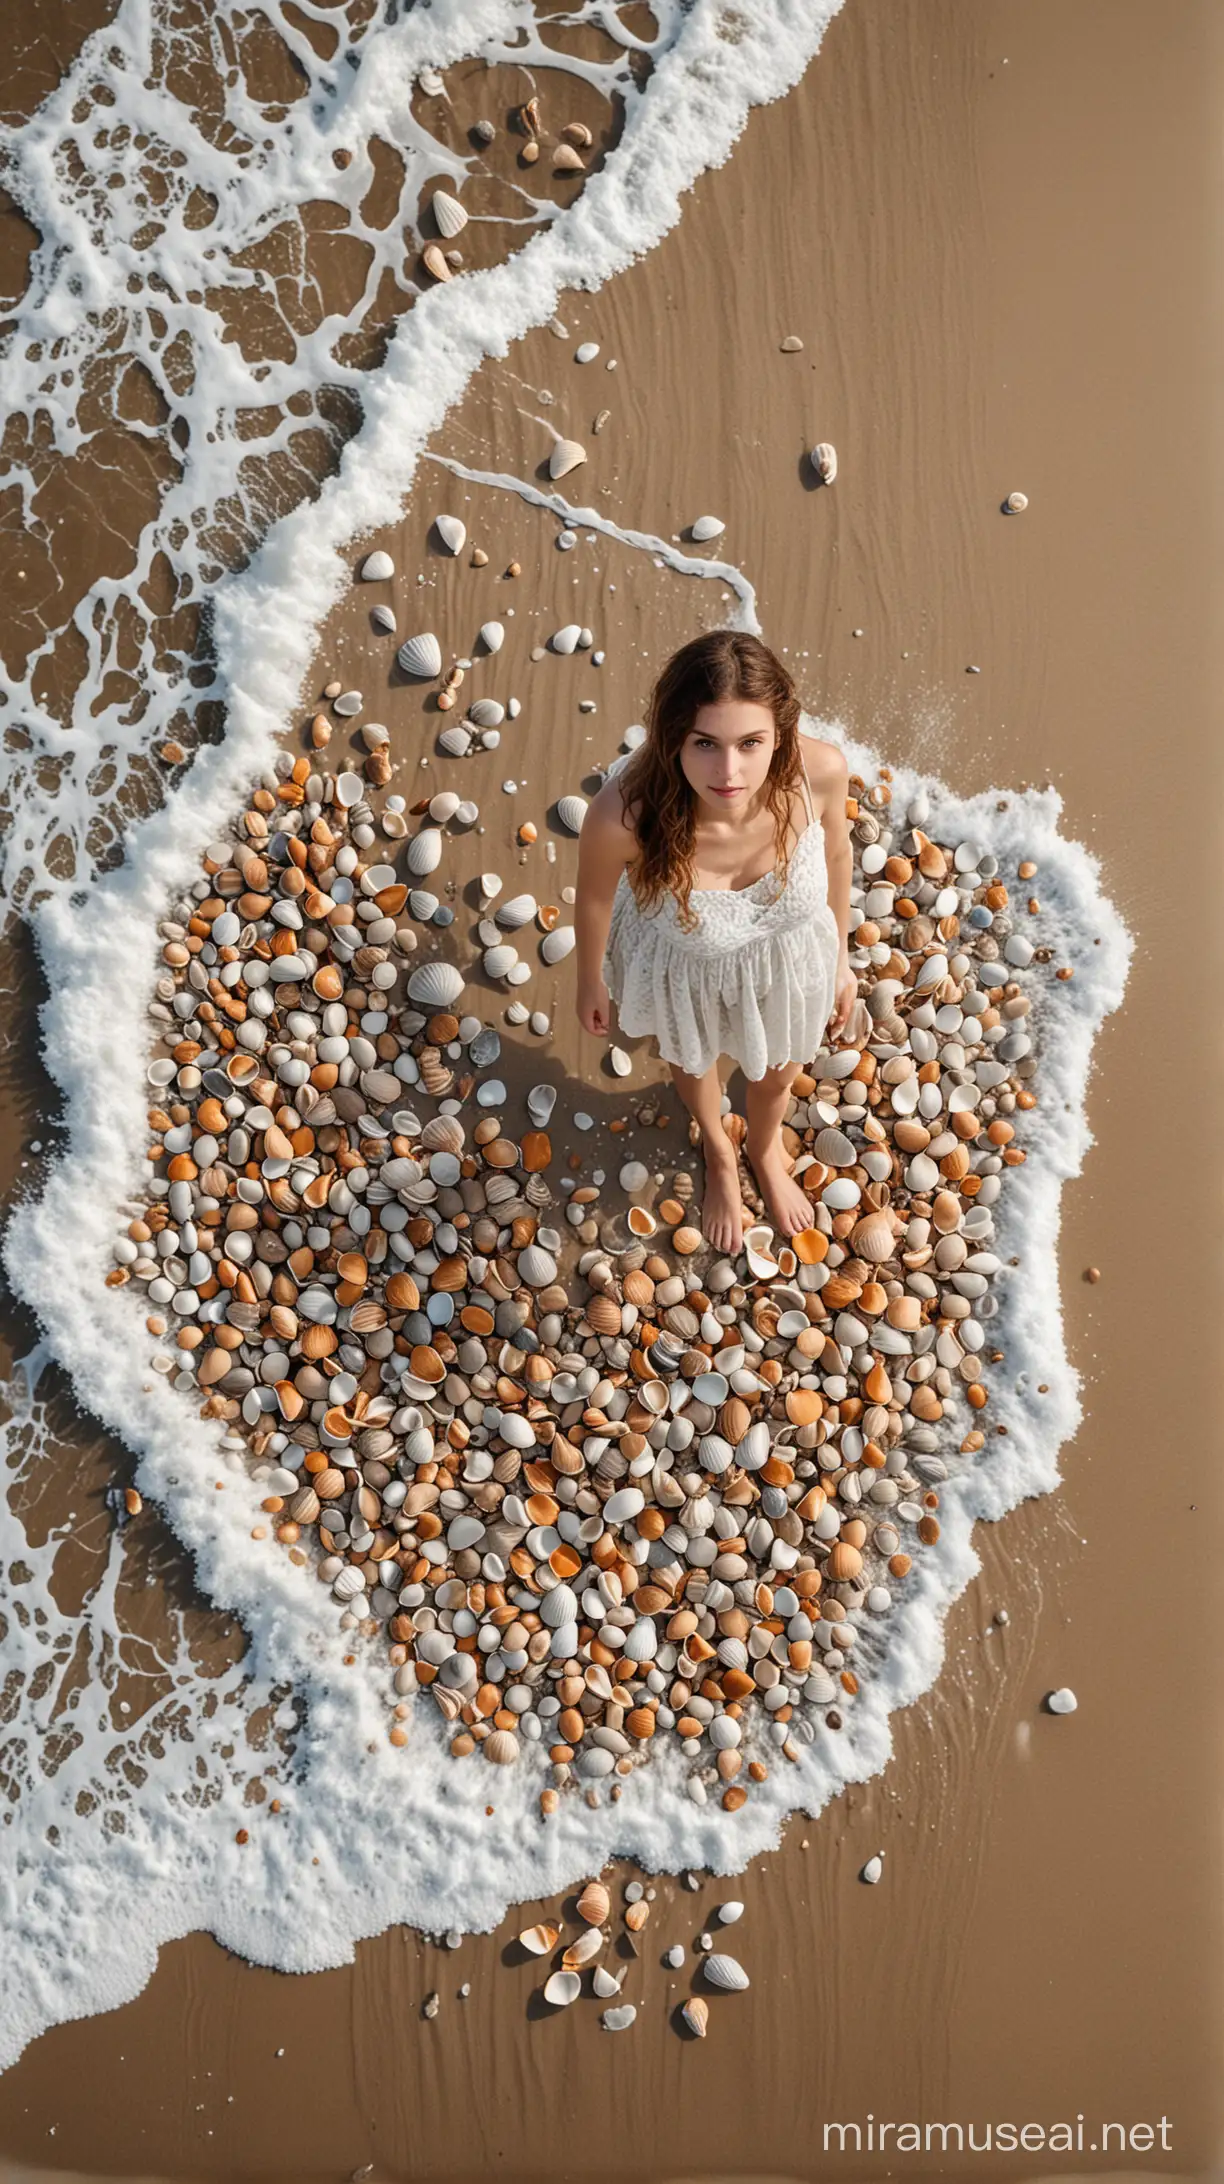 Beautiful Girl in Chic Sea Waves Dress on Sandy Seashore with Shells